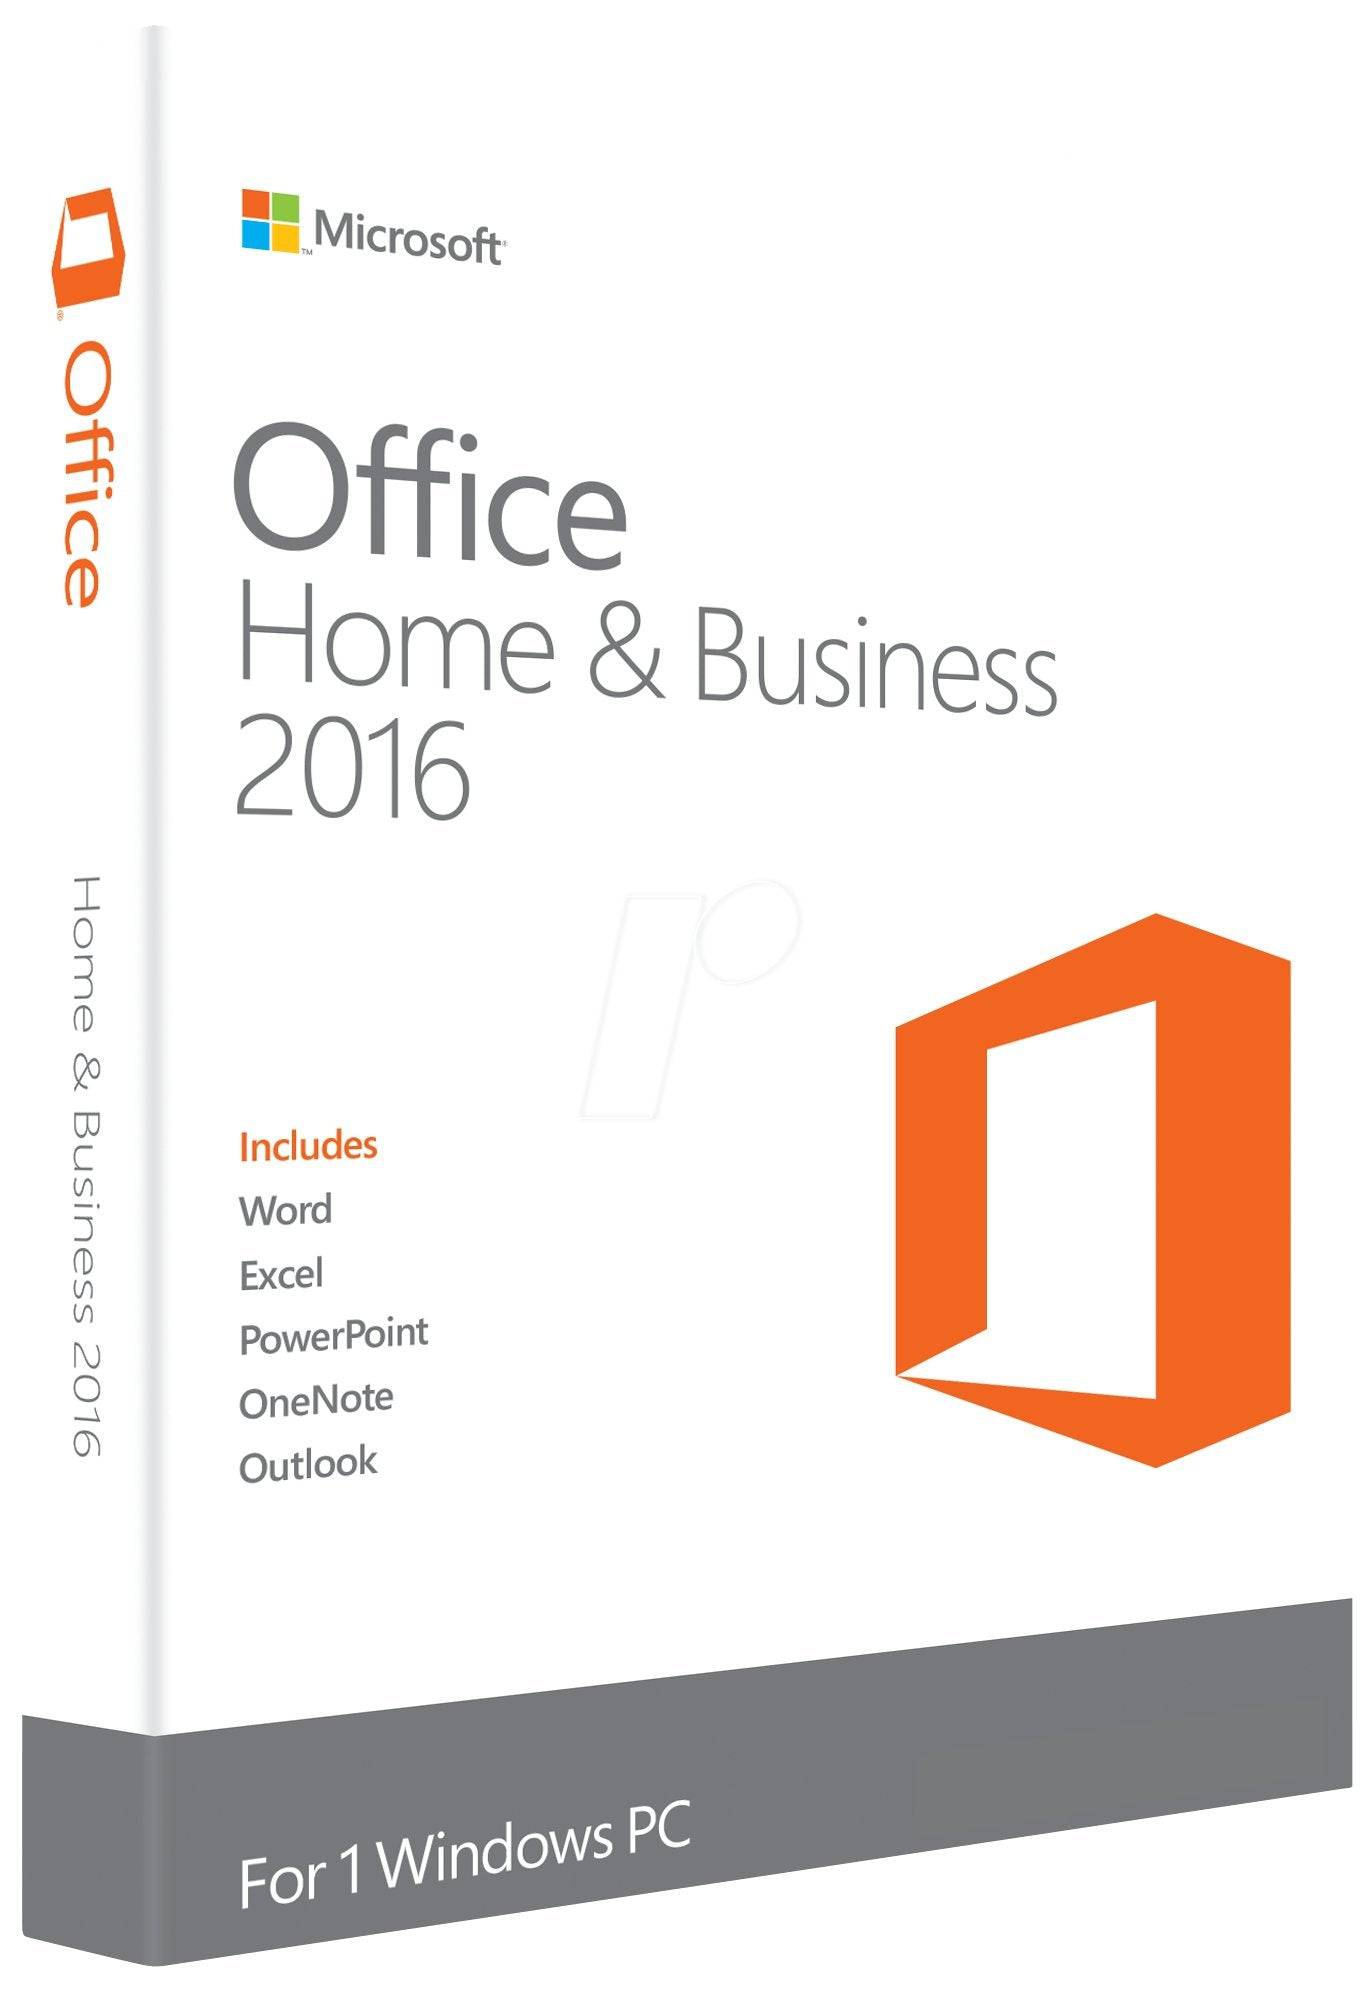 Microsoft Office 2016 Home and Business | Genuine License Key | Full Version for 1 PC - INFINITE-ITECH